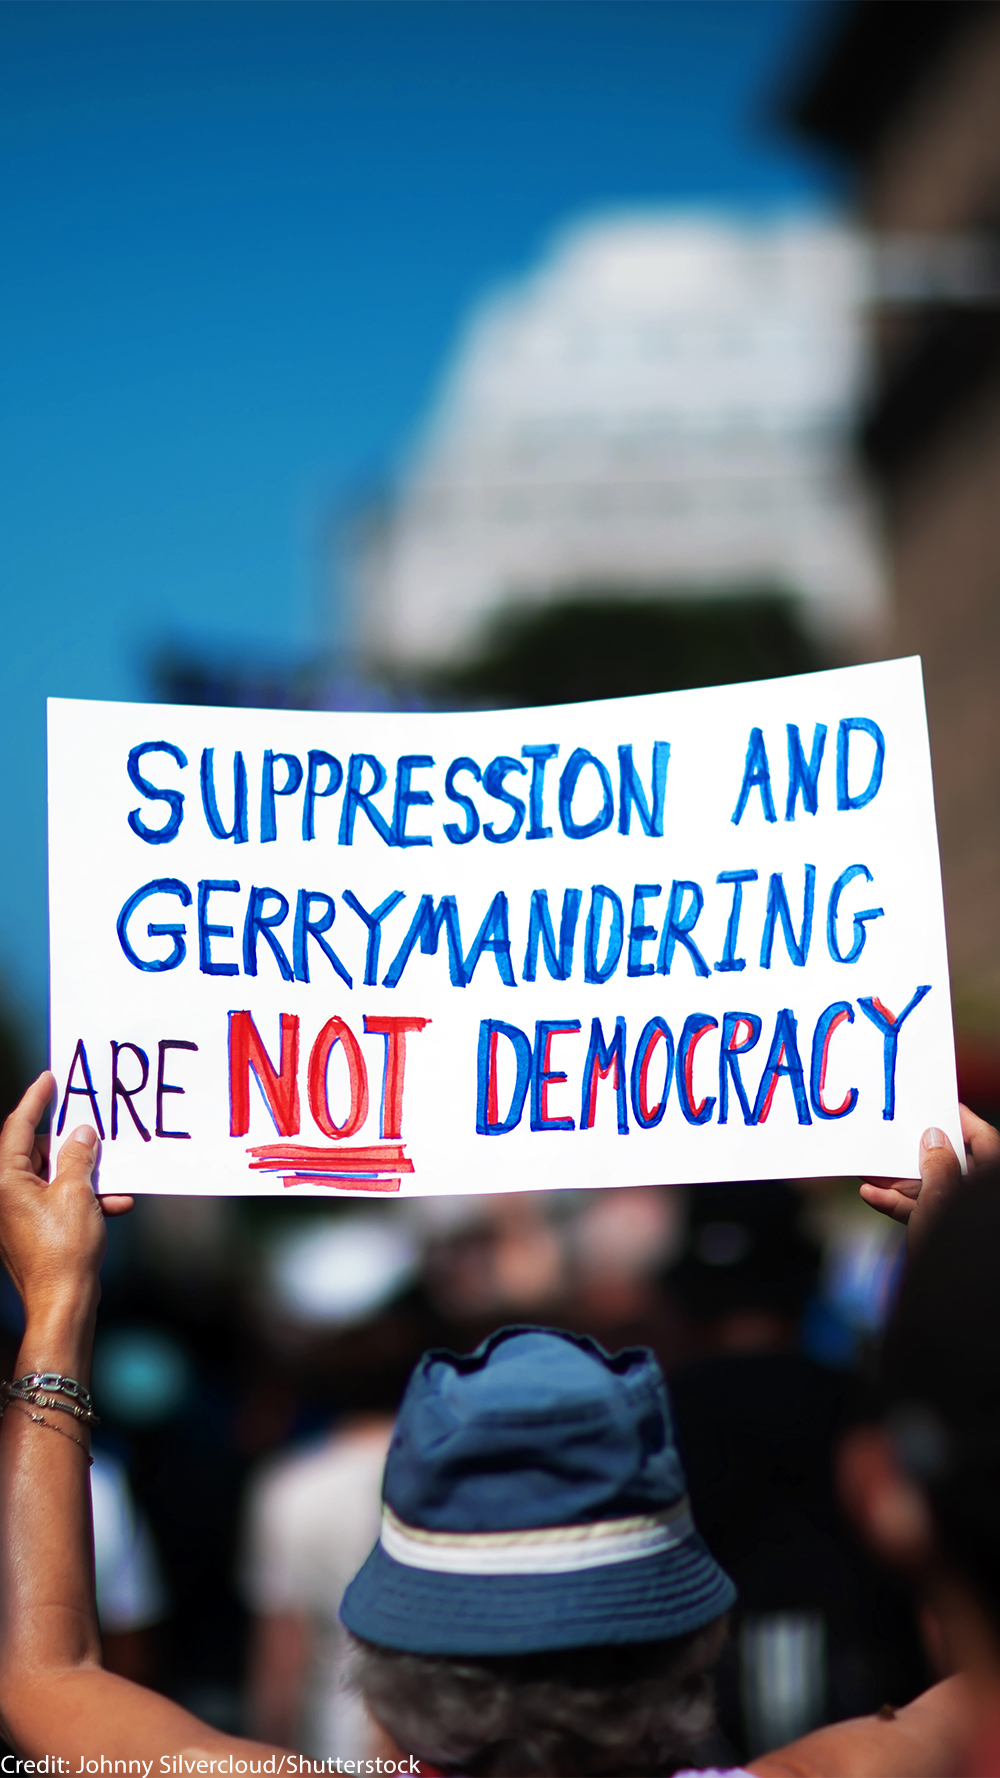 A demonstrator at the March On for Voting Rights in Washington D.C. holds up a sign reading "Suppression and Gerrymandering are Not Democracy".